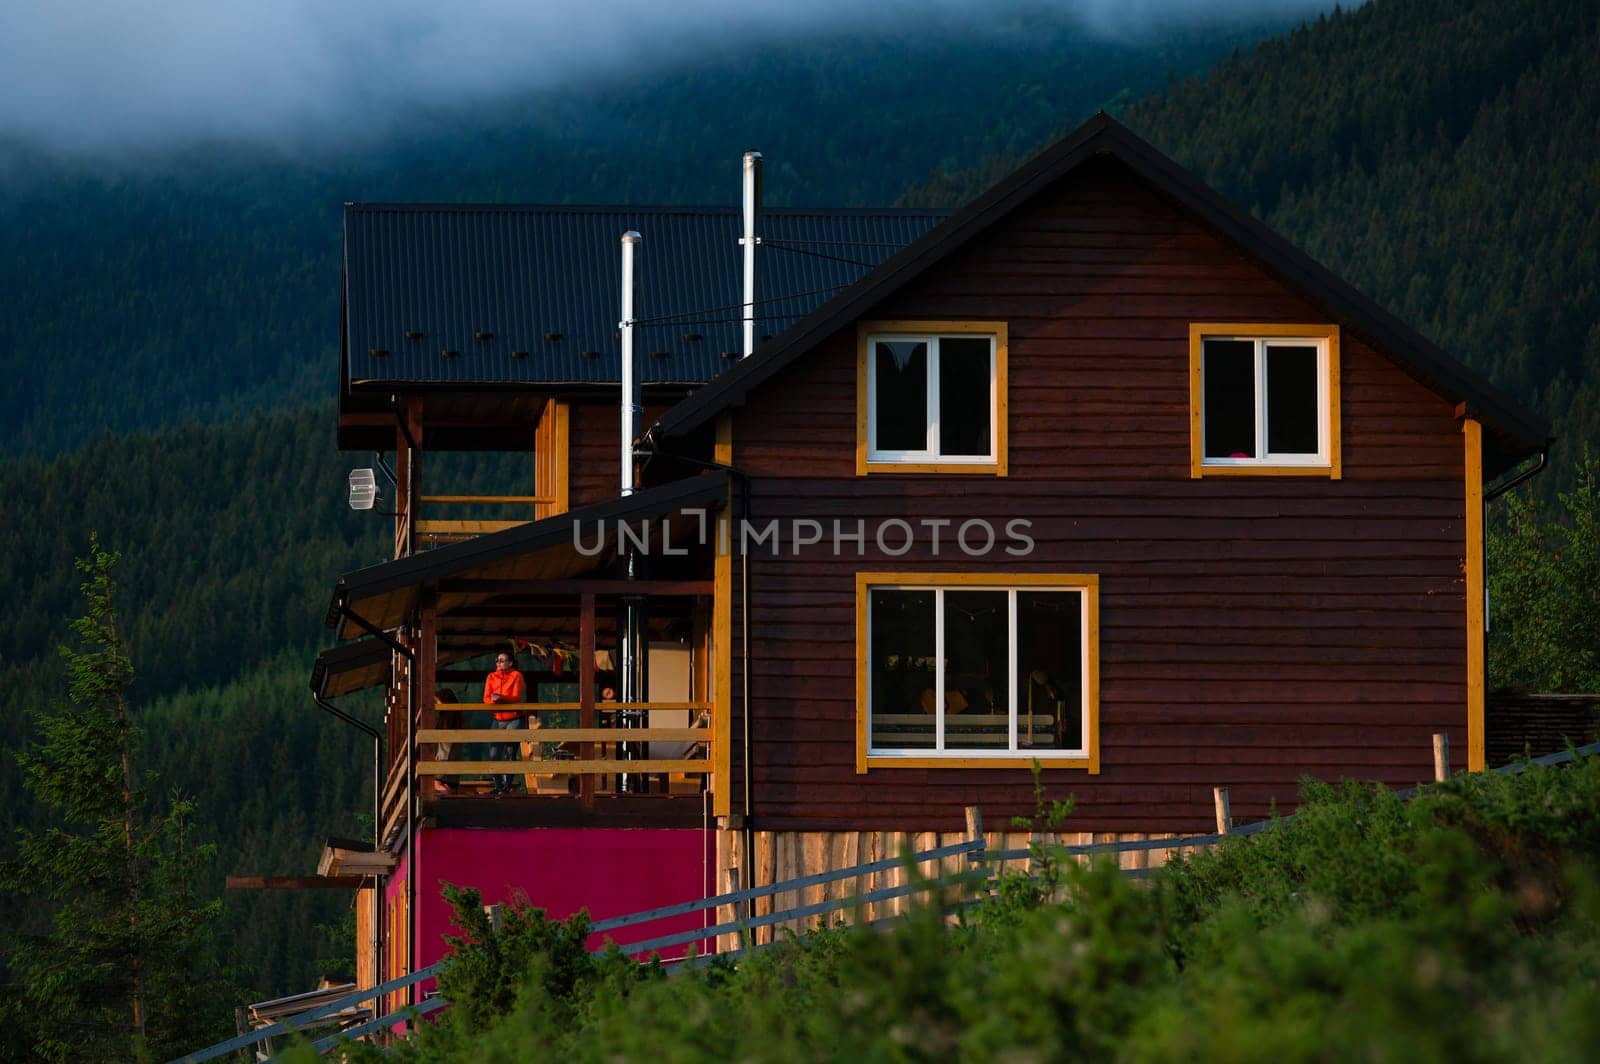 a girl in an orange jacket stands on the terrace of a wooden house against the background of mountains by Niko_Cingaryuk